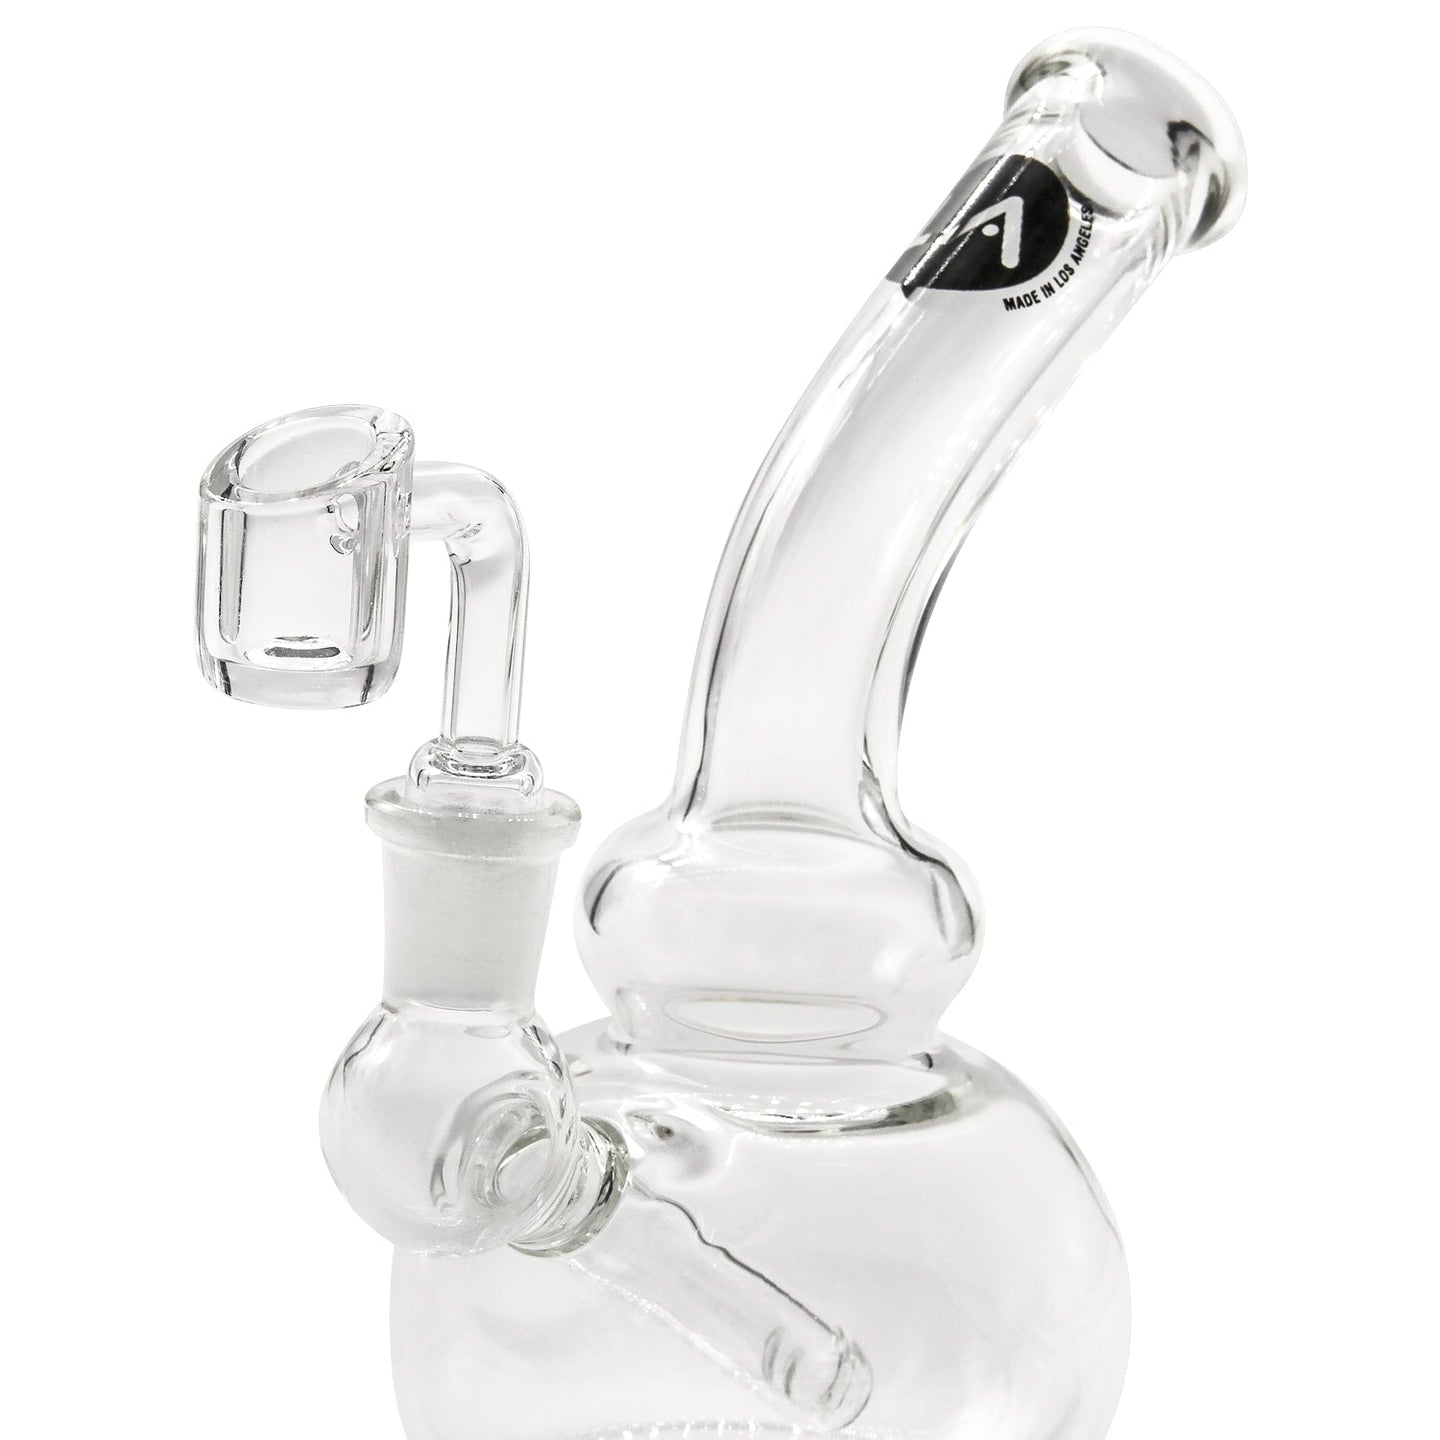 LA Pipes Bubble Concentrate Waterpipe - Glasss Station